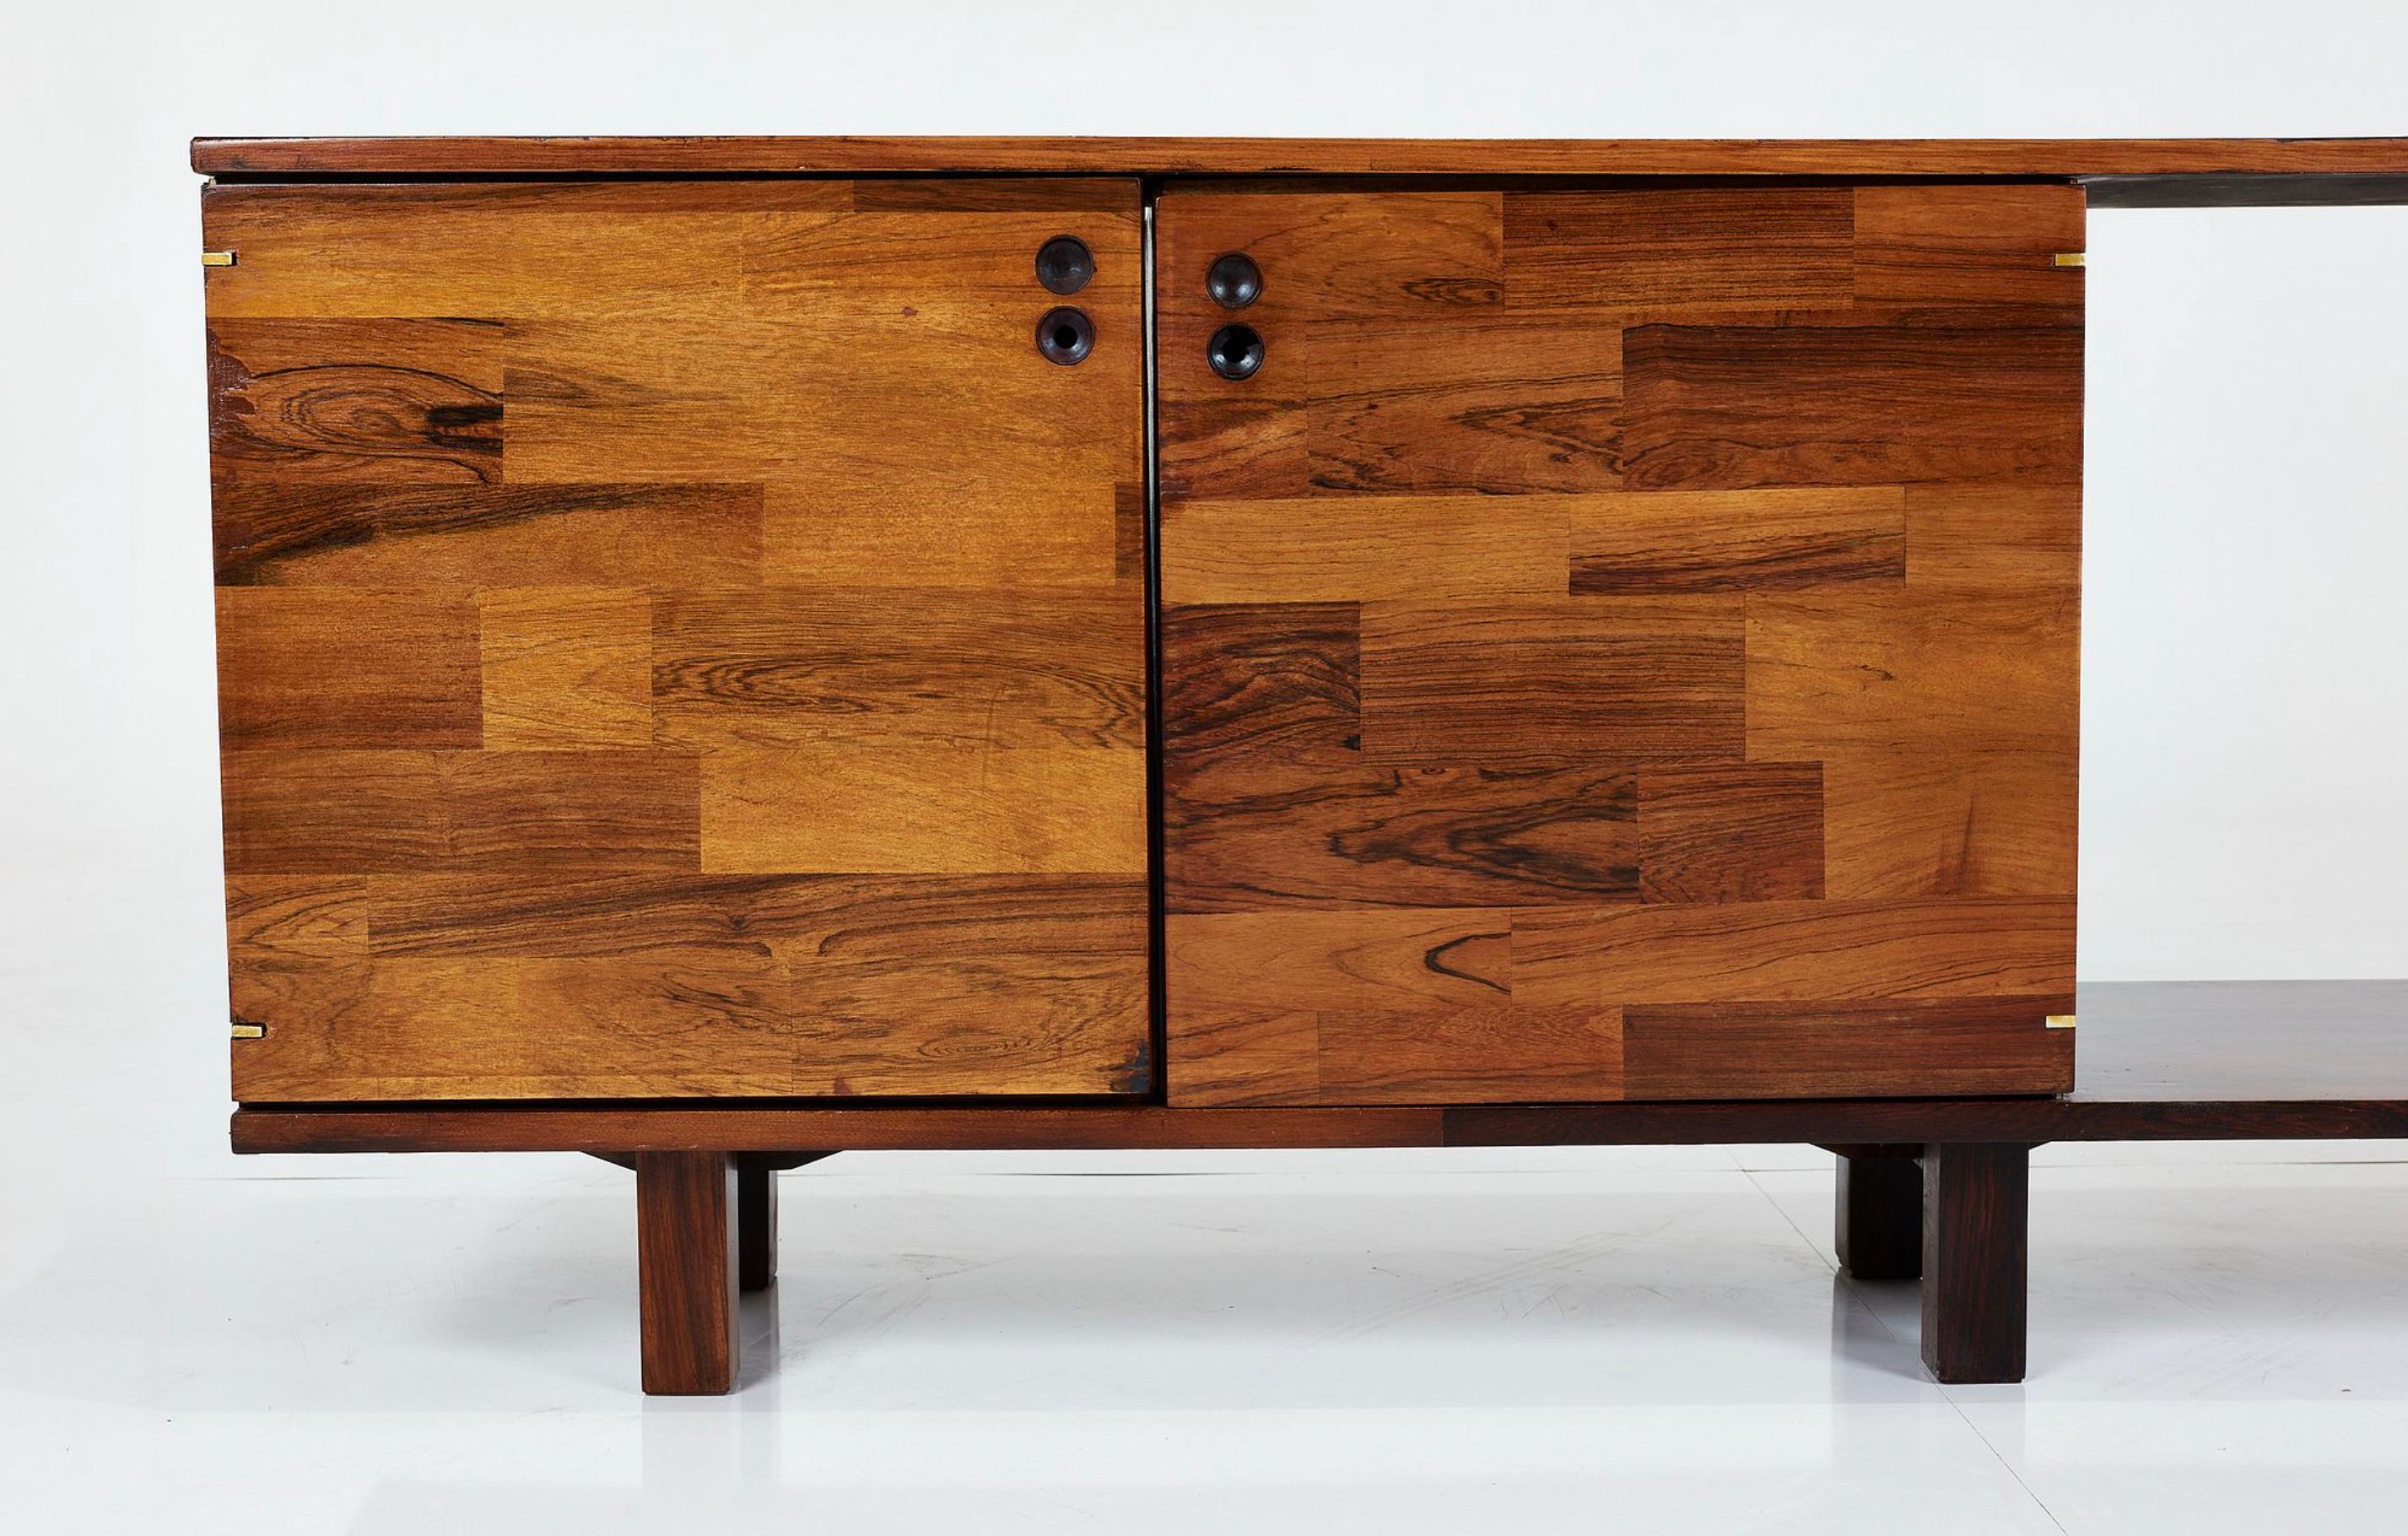 Mid-Century Modern Jorge Zalszupin Rosewood Mid-Century Credenza for L'Atelier, Brazil, 1960s For Sale